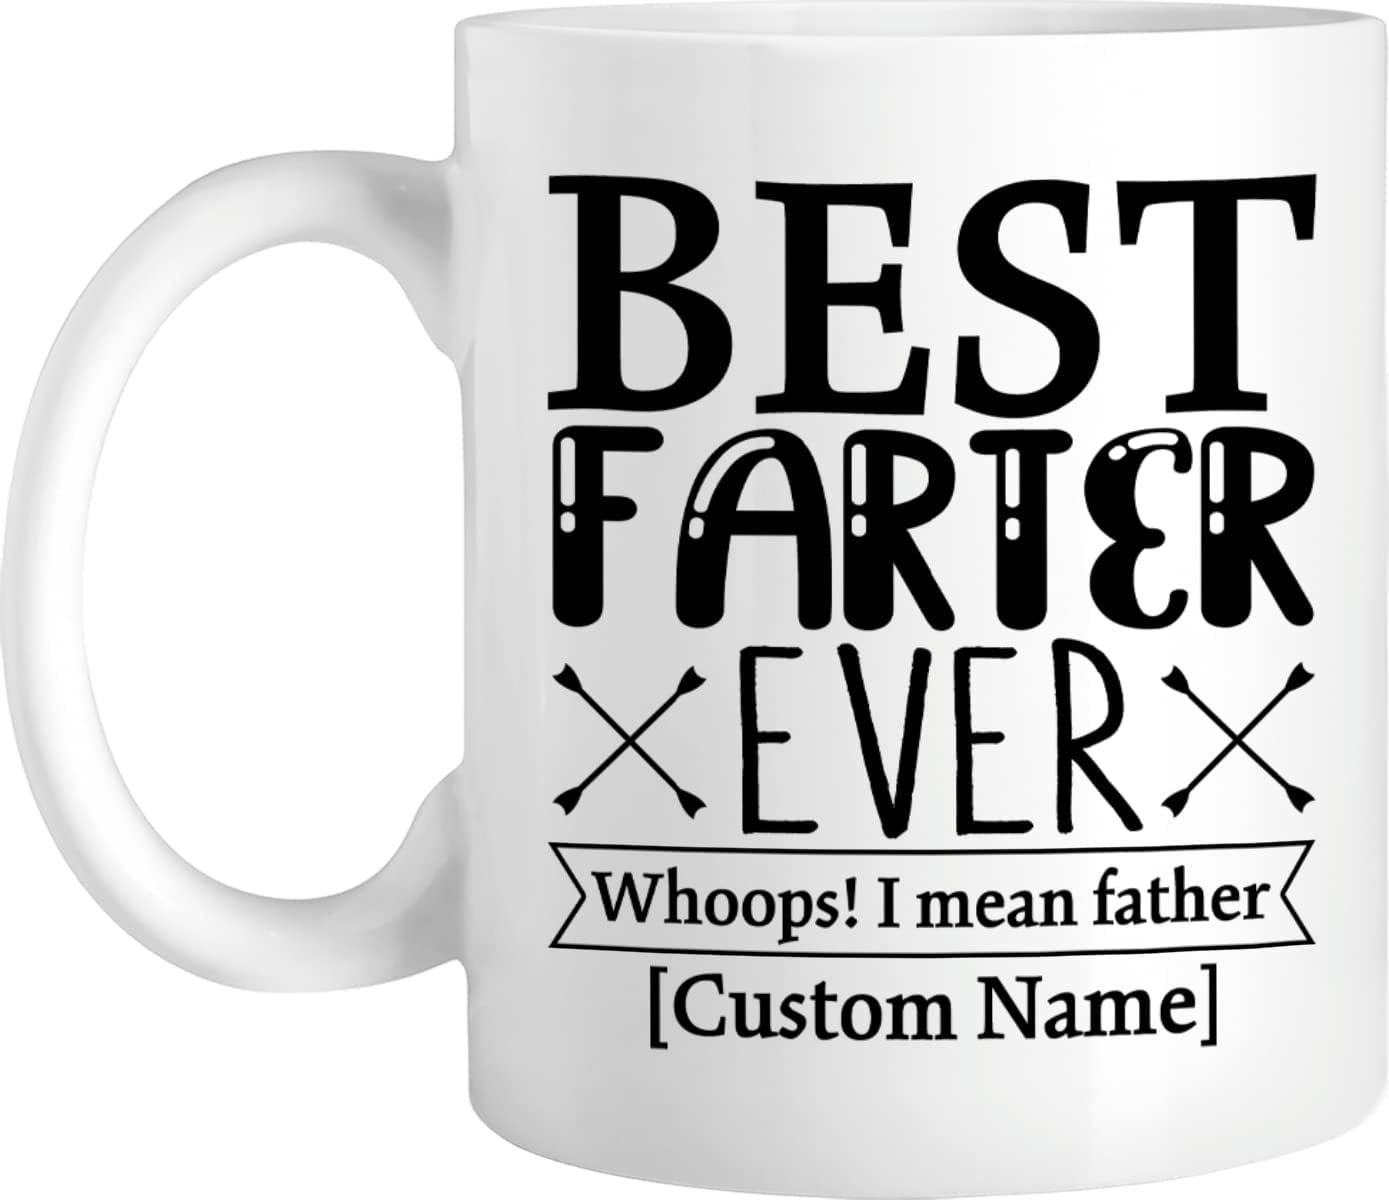 Insulated Coffee Cup, Personalized Laser Engraved Mug, Dishwasher